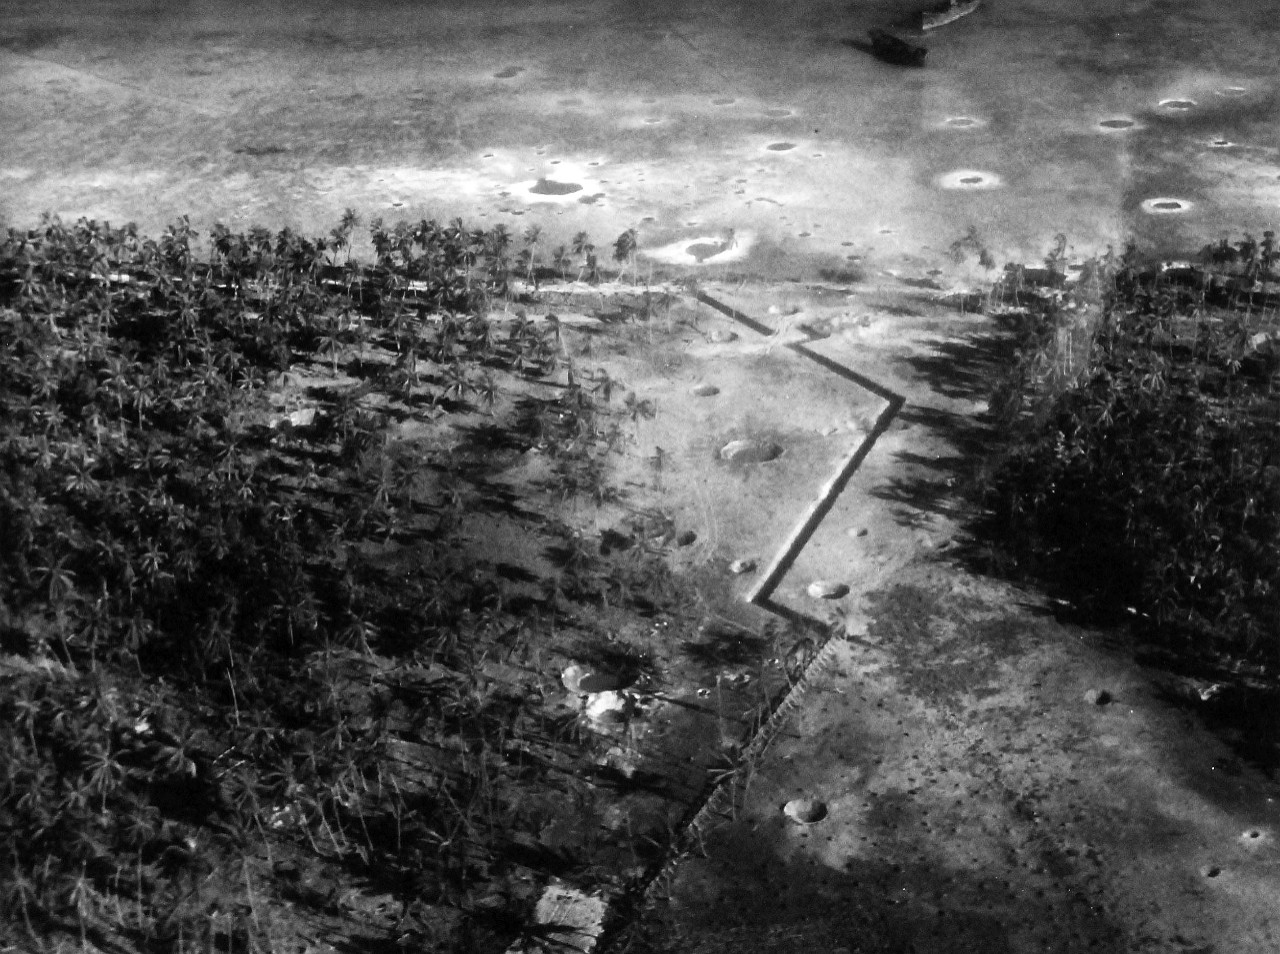 80-G-204730:  Operation Galvanic, November 1943.      Oblique of damage done to enemy positions on Makin Island, Gilbert Islands by bombing and bombardment, 20-21 November 1943 by US forces.   Shell or bomb craters, old hulks, house, revetments.   Official U.S. Navy Photograph, now in the collections of the National Archives.  (2013/09/19).